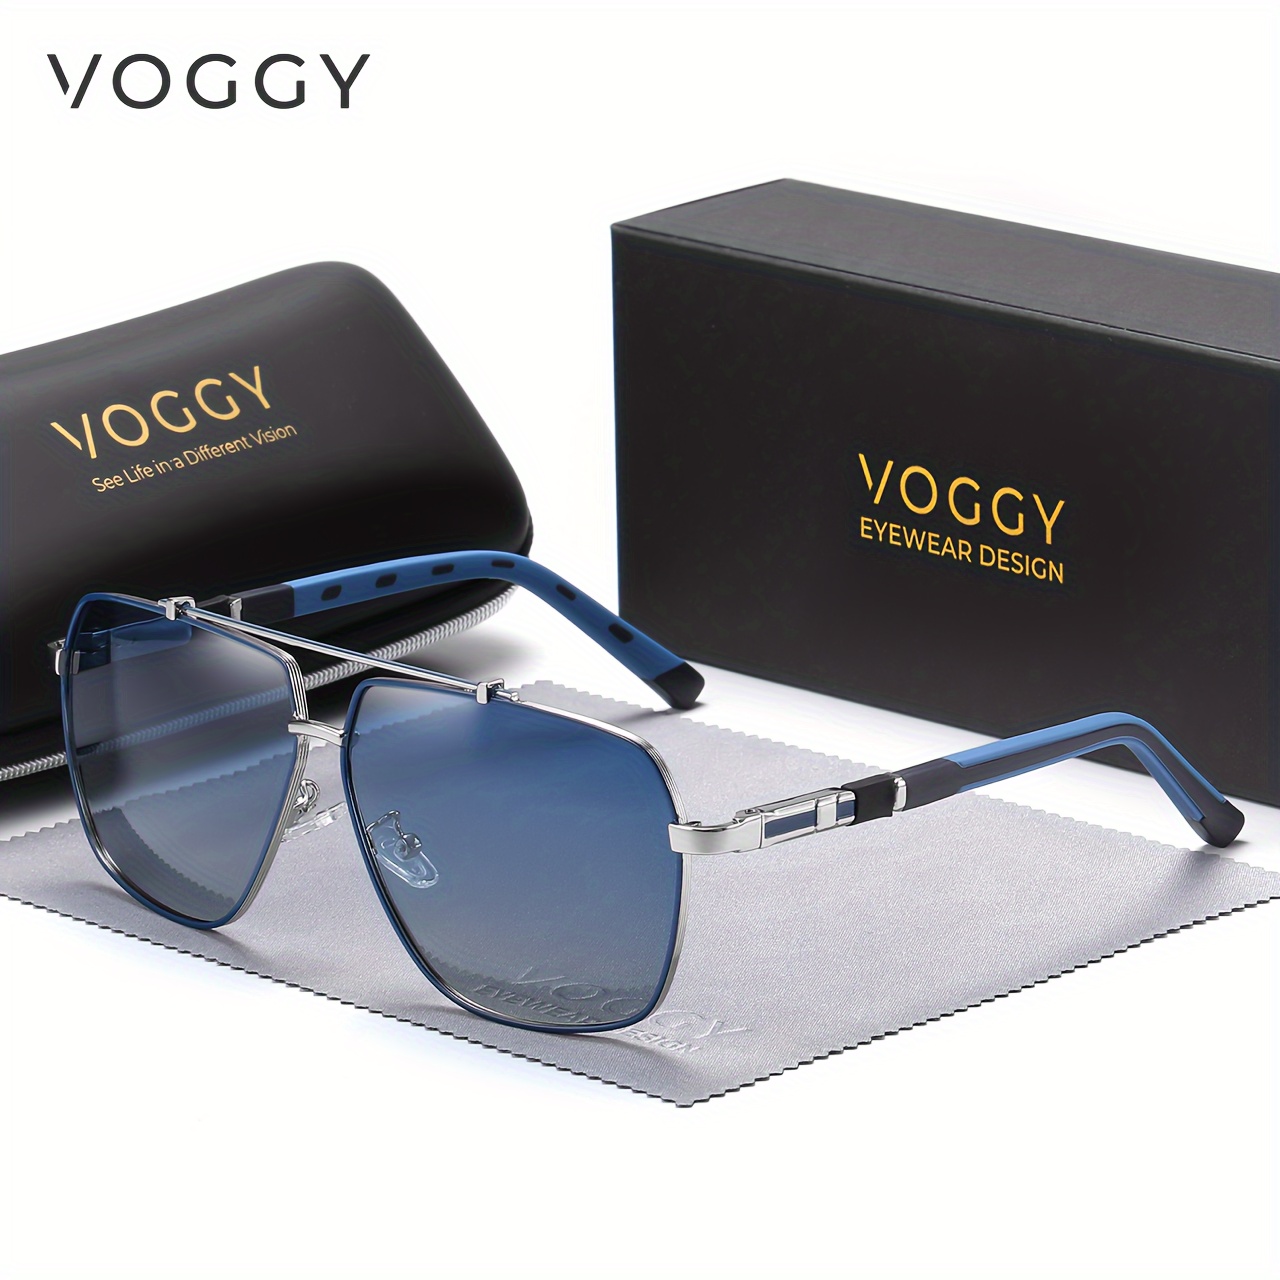 

Voggy Polarized Uv Protection Sunglasses For Women Men Vintage Metal Frame Sun Shades For Driving Beach Travel With Gifts Box Mother's Day/give Gifts